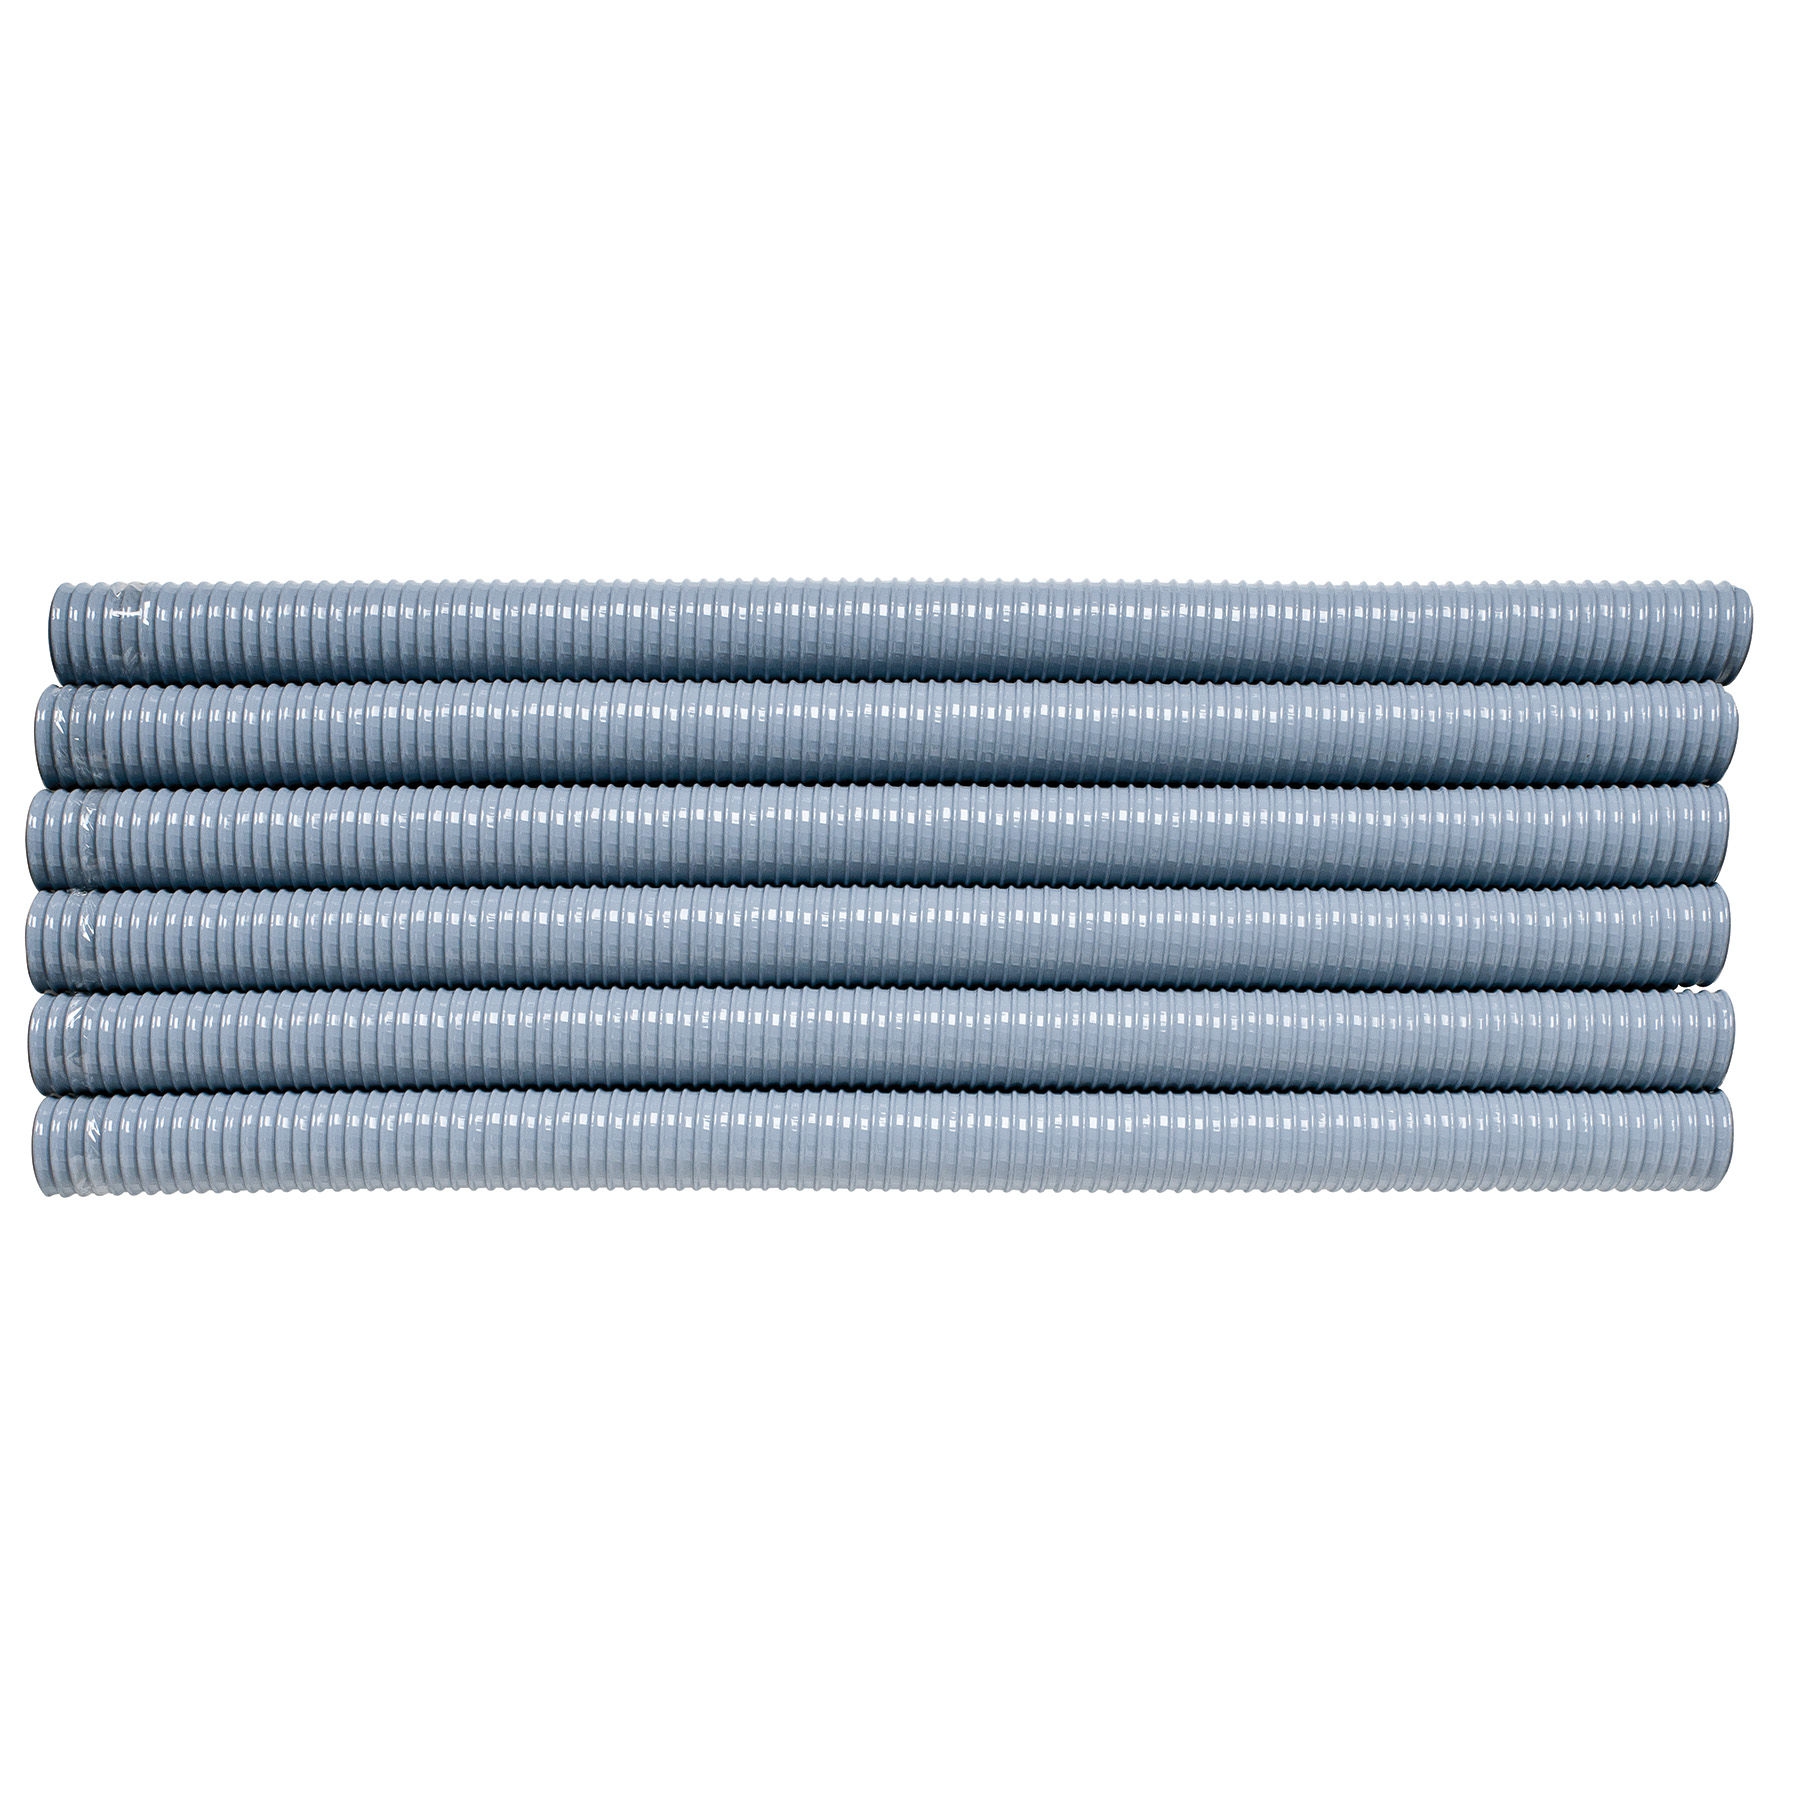 NuTone® 36" Flexible Tubing for Central Vacuum